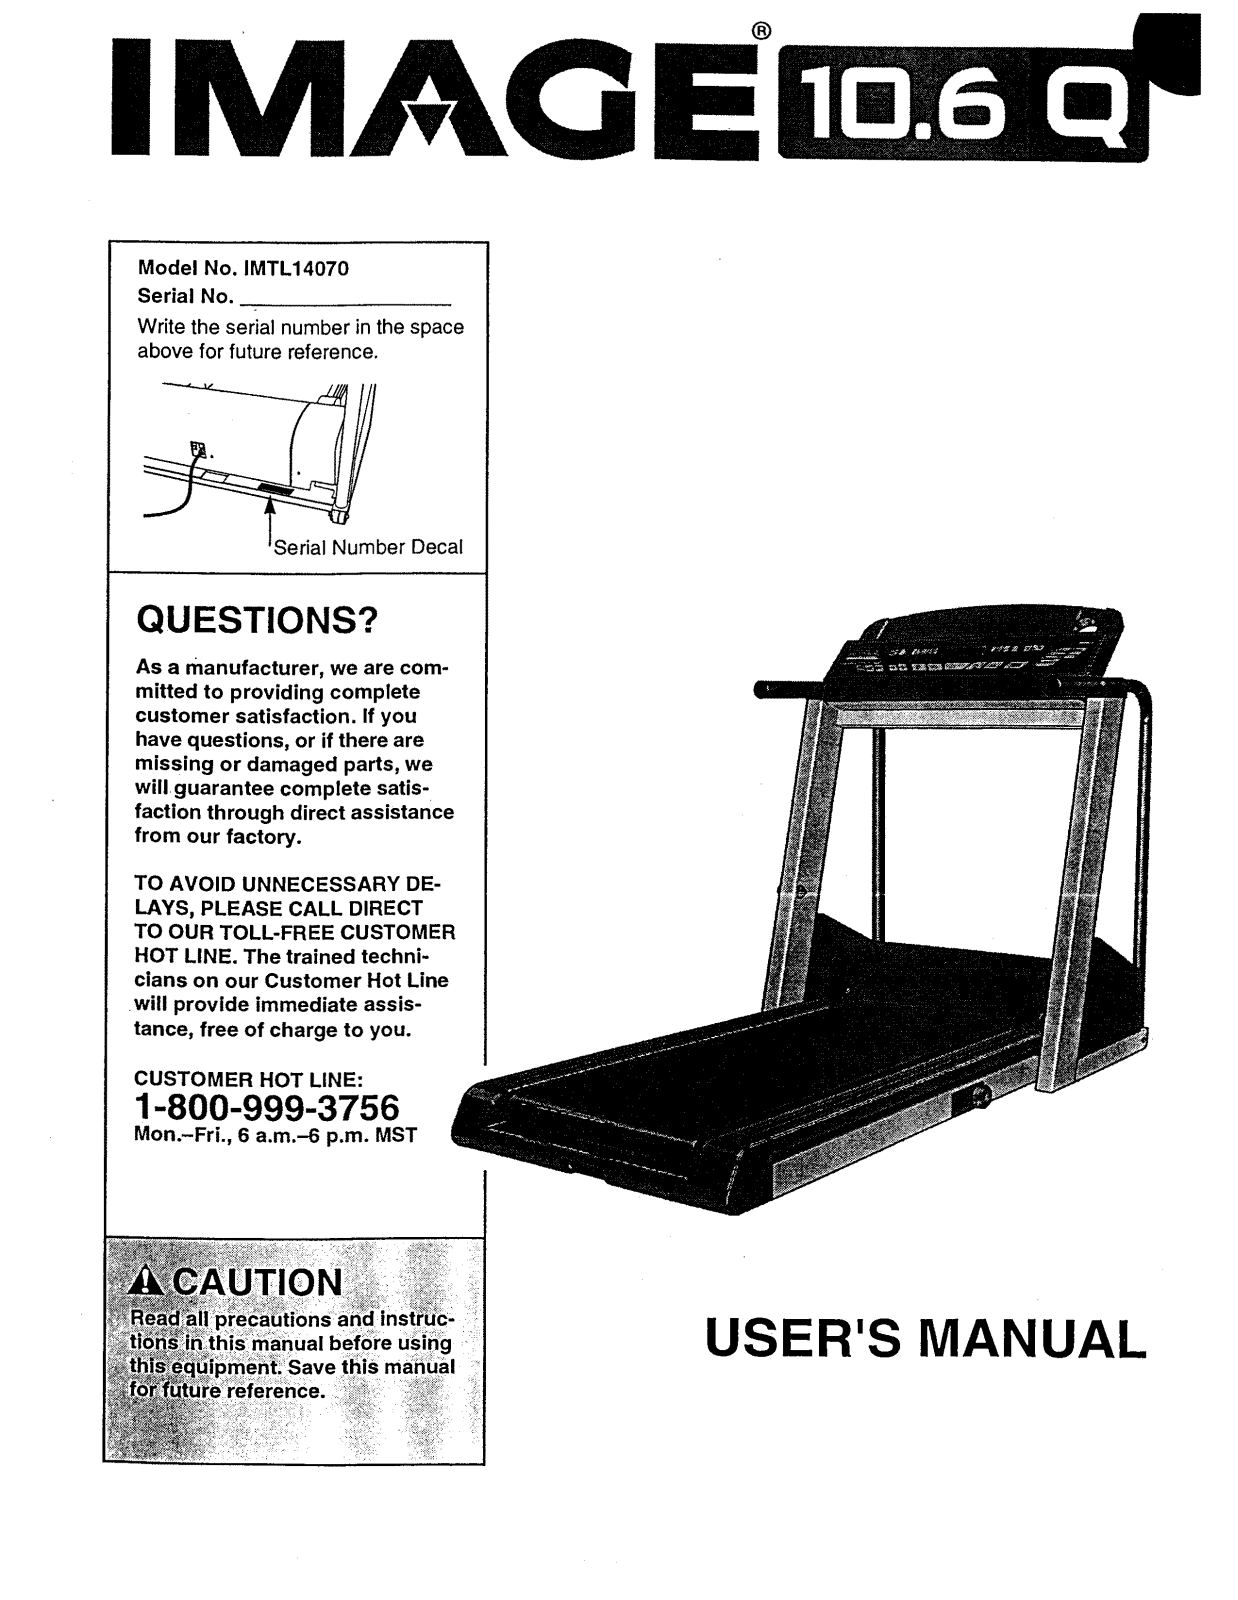 Image IMTL14070 Owner’s Manual